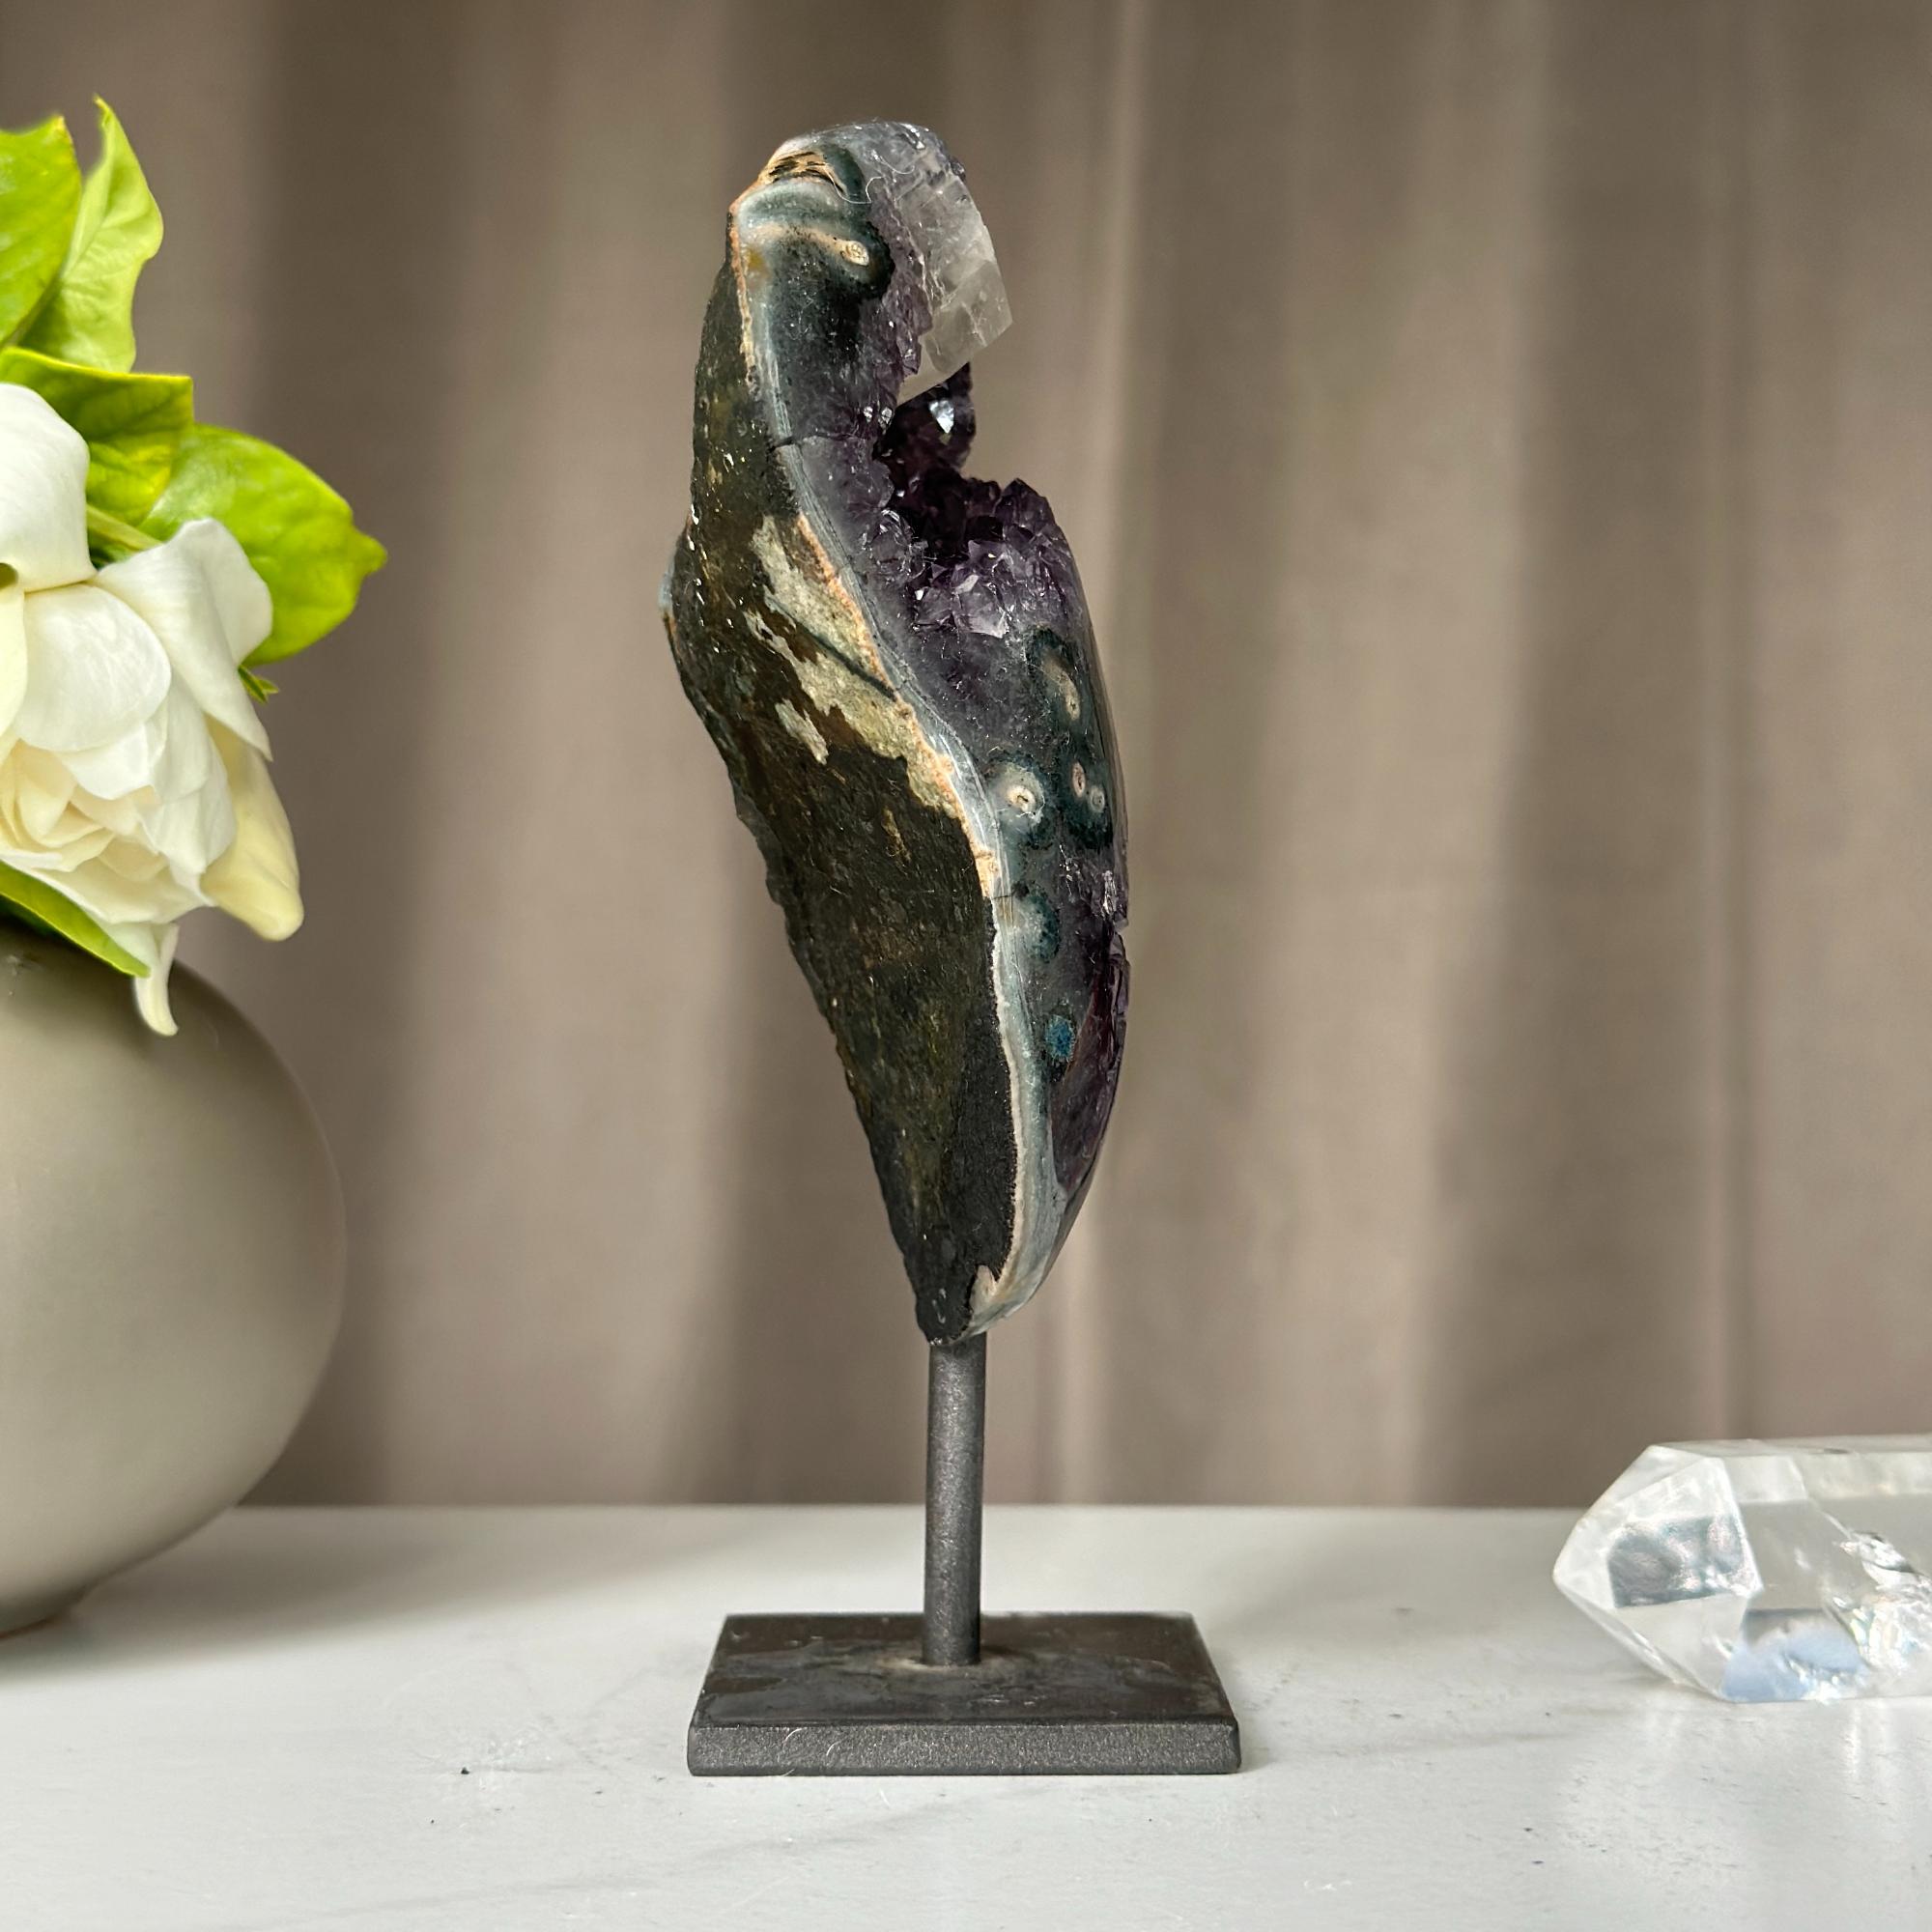 Incredible Amethyst Crystal with Display Stand, Large Druzy piece with stalactite eyes formations